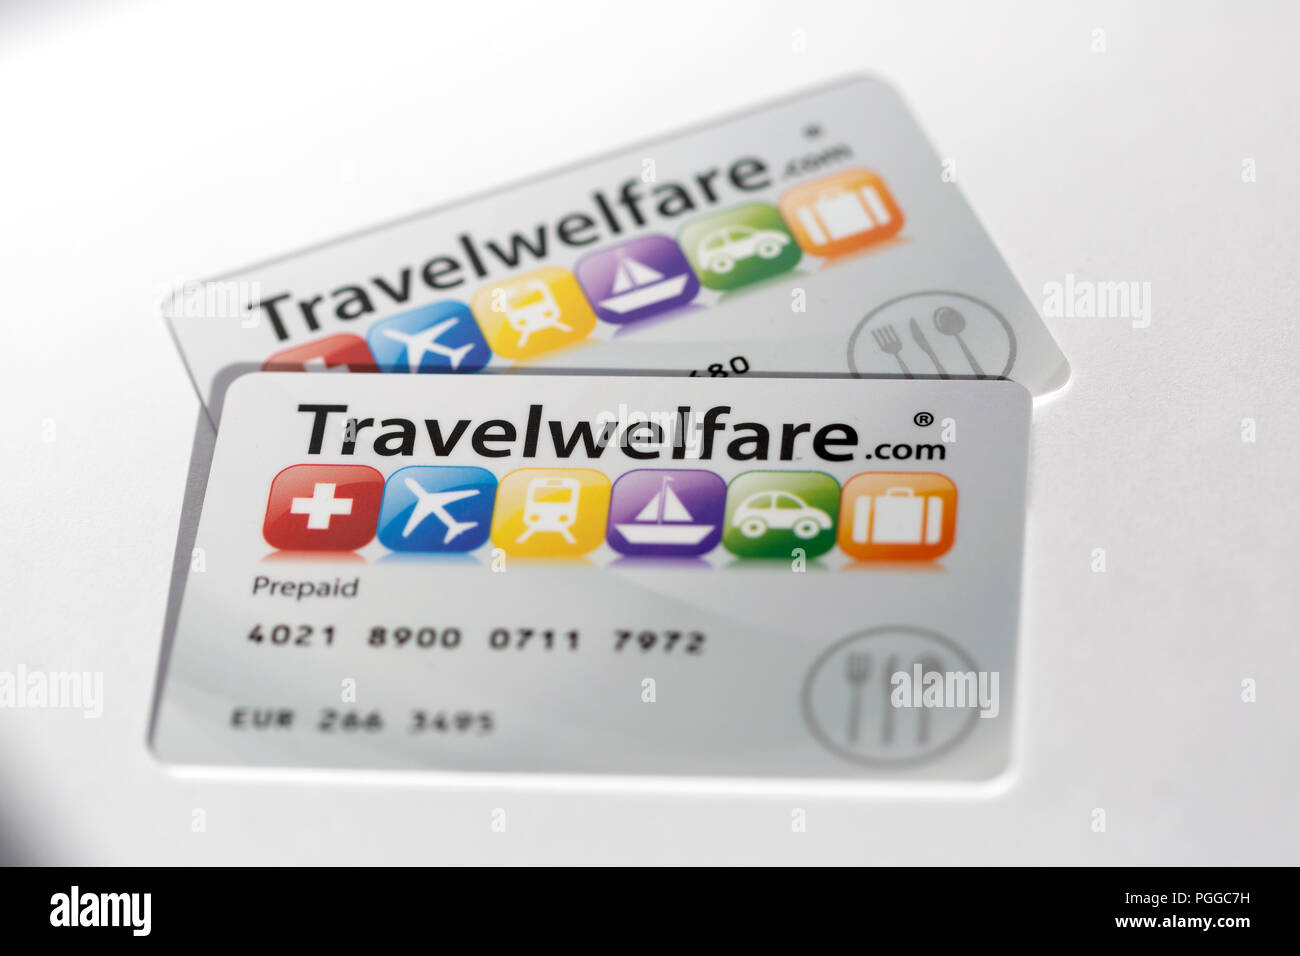 Travel Welfare cards.Travel Welfare provide VISA approved 'gift card' style vouchers incorporating magnetic stripe technology. Stock Photo